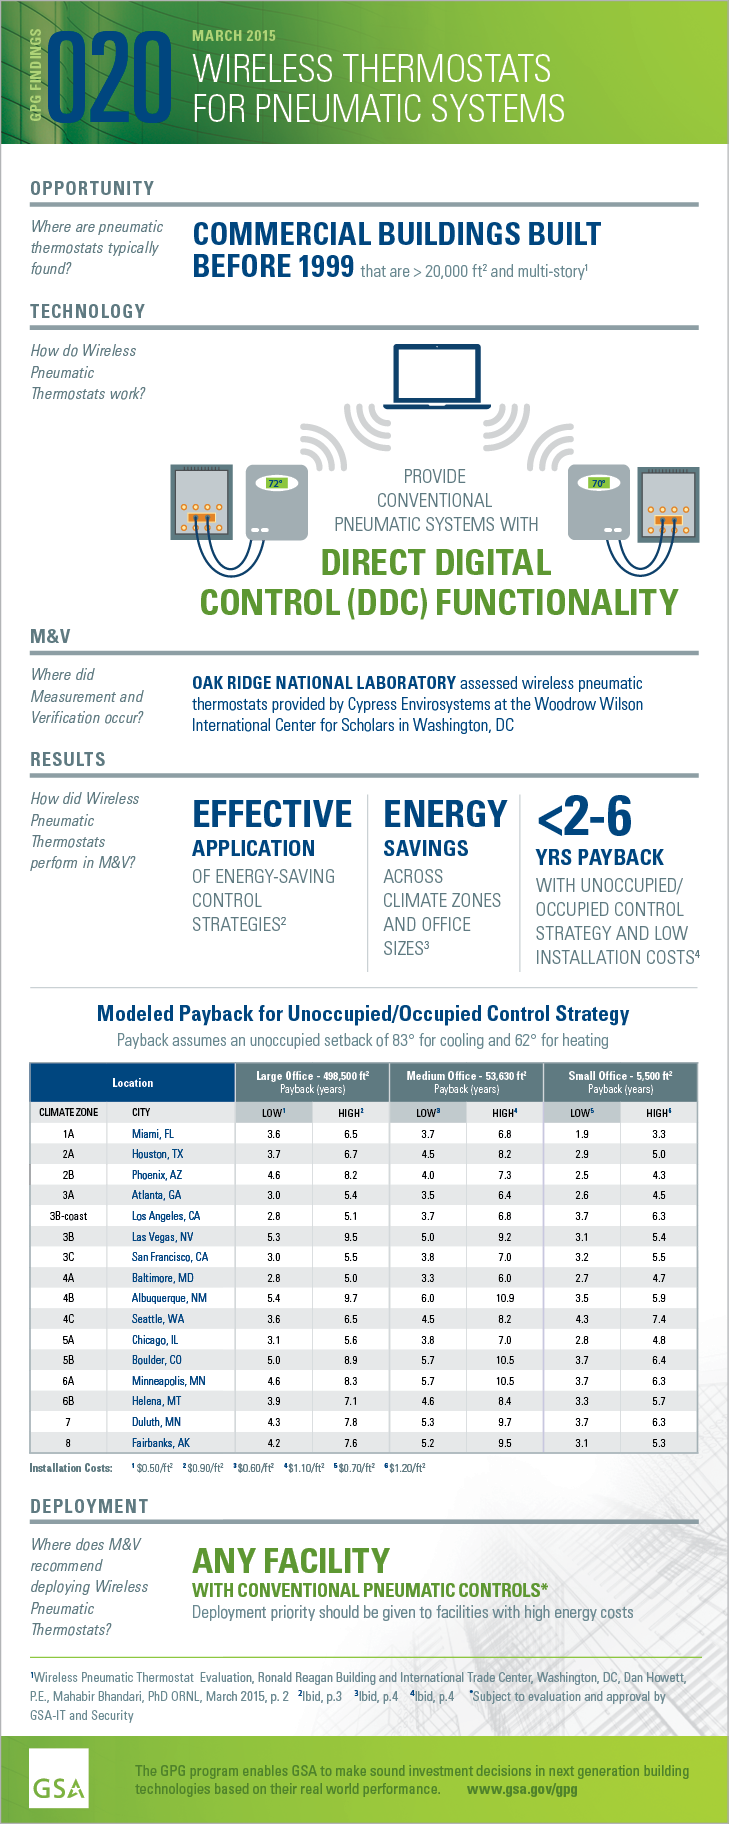 Download the PDF of the full-size infographic for GPG020 Wireless Pneumatic Thermostats.